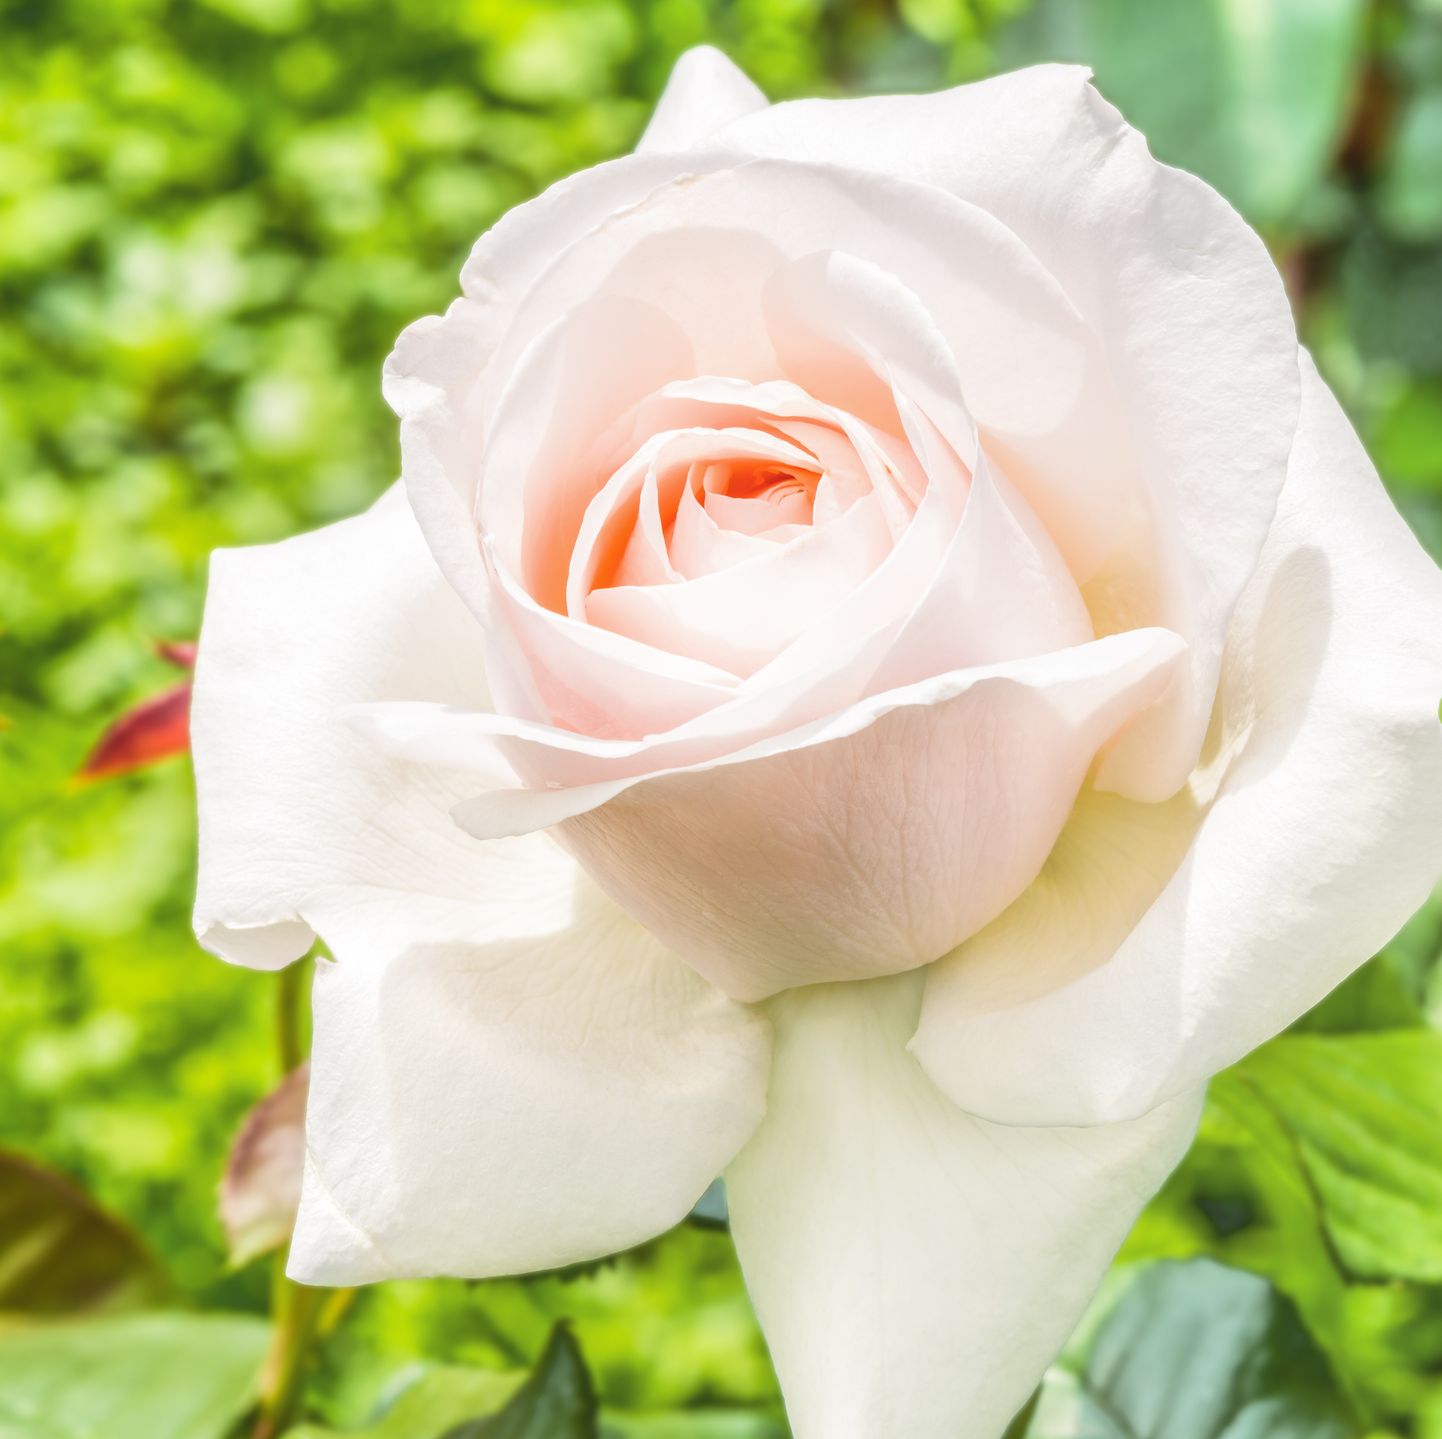 How To Grow Roses - Growing Roses